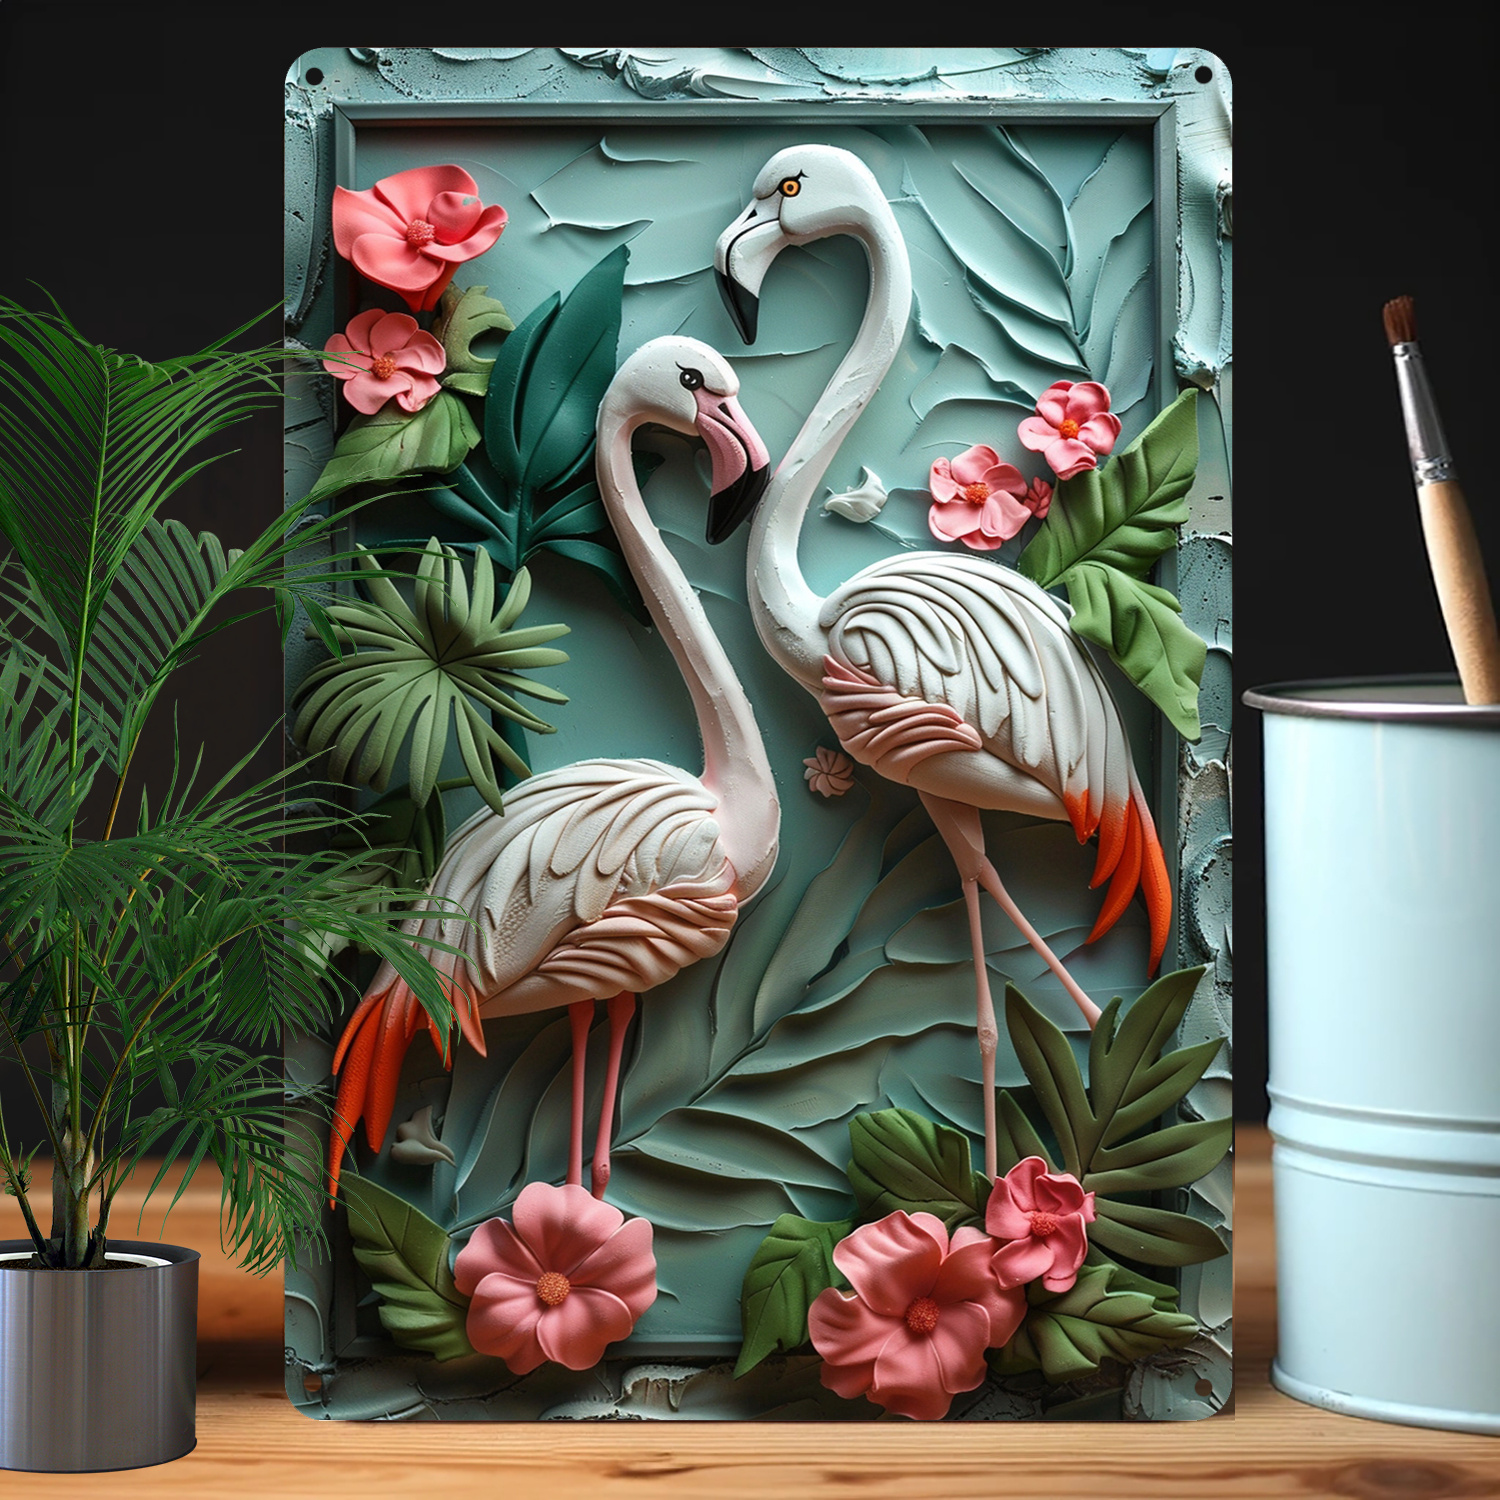 

Flamingo-themed Aluminum Metal Tin Sign - 8x12 Inches, Vintage Spring & Summer Decor For Home, Office, Gym, Kitchen, Studio - Perfect Father's Day Gift